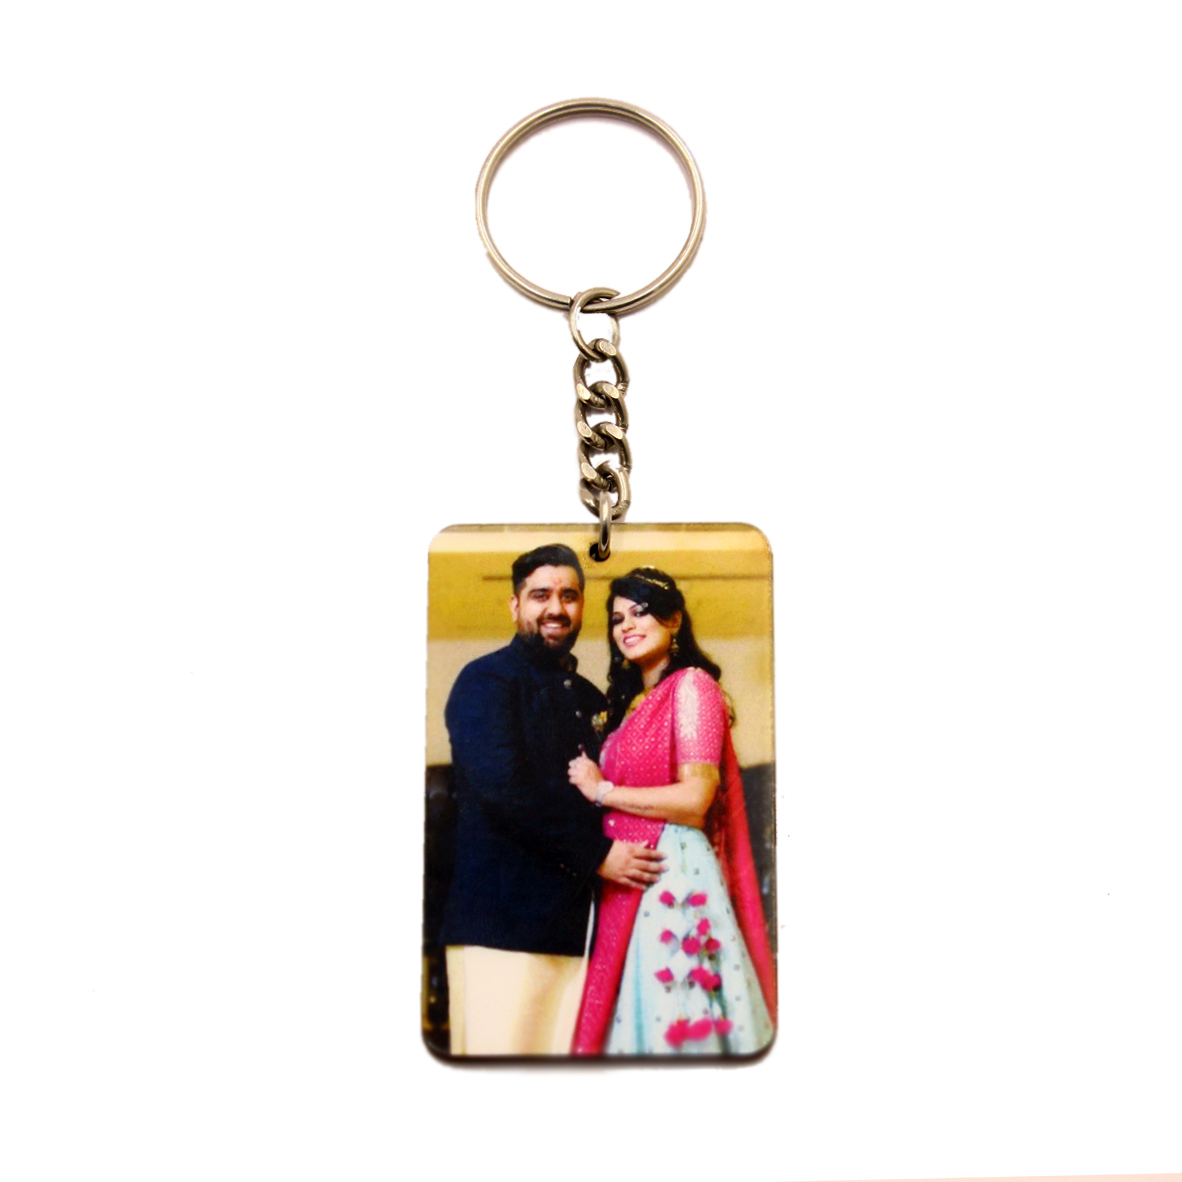 Customized photo or image keychains get the perfect keychains